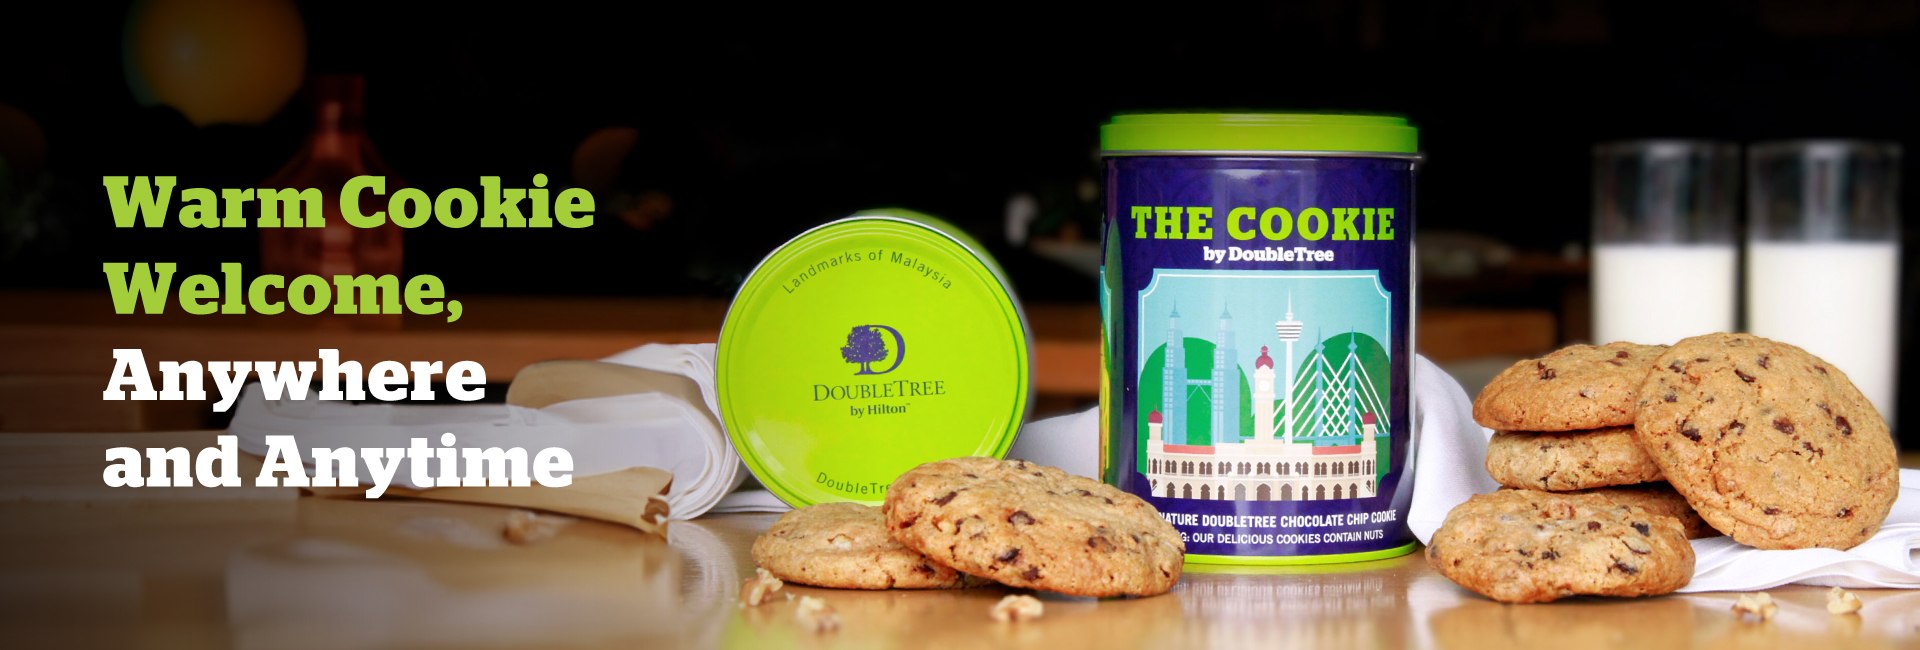 DoubleTree by Hilton Signature Cookie